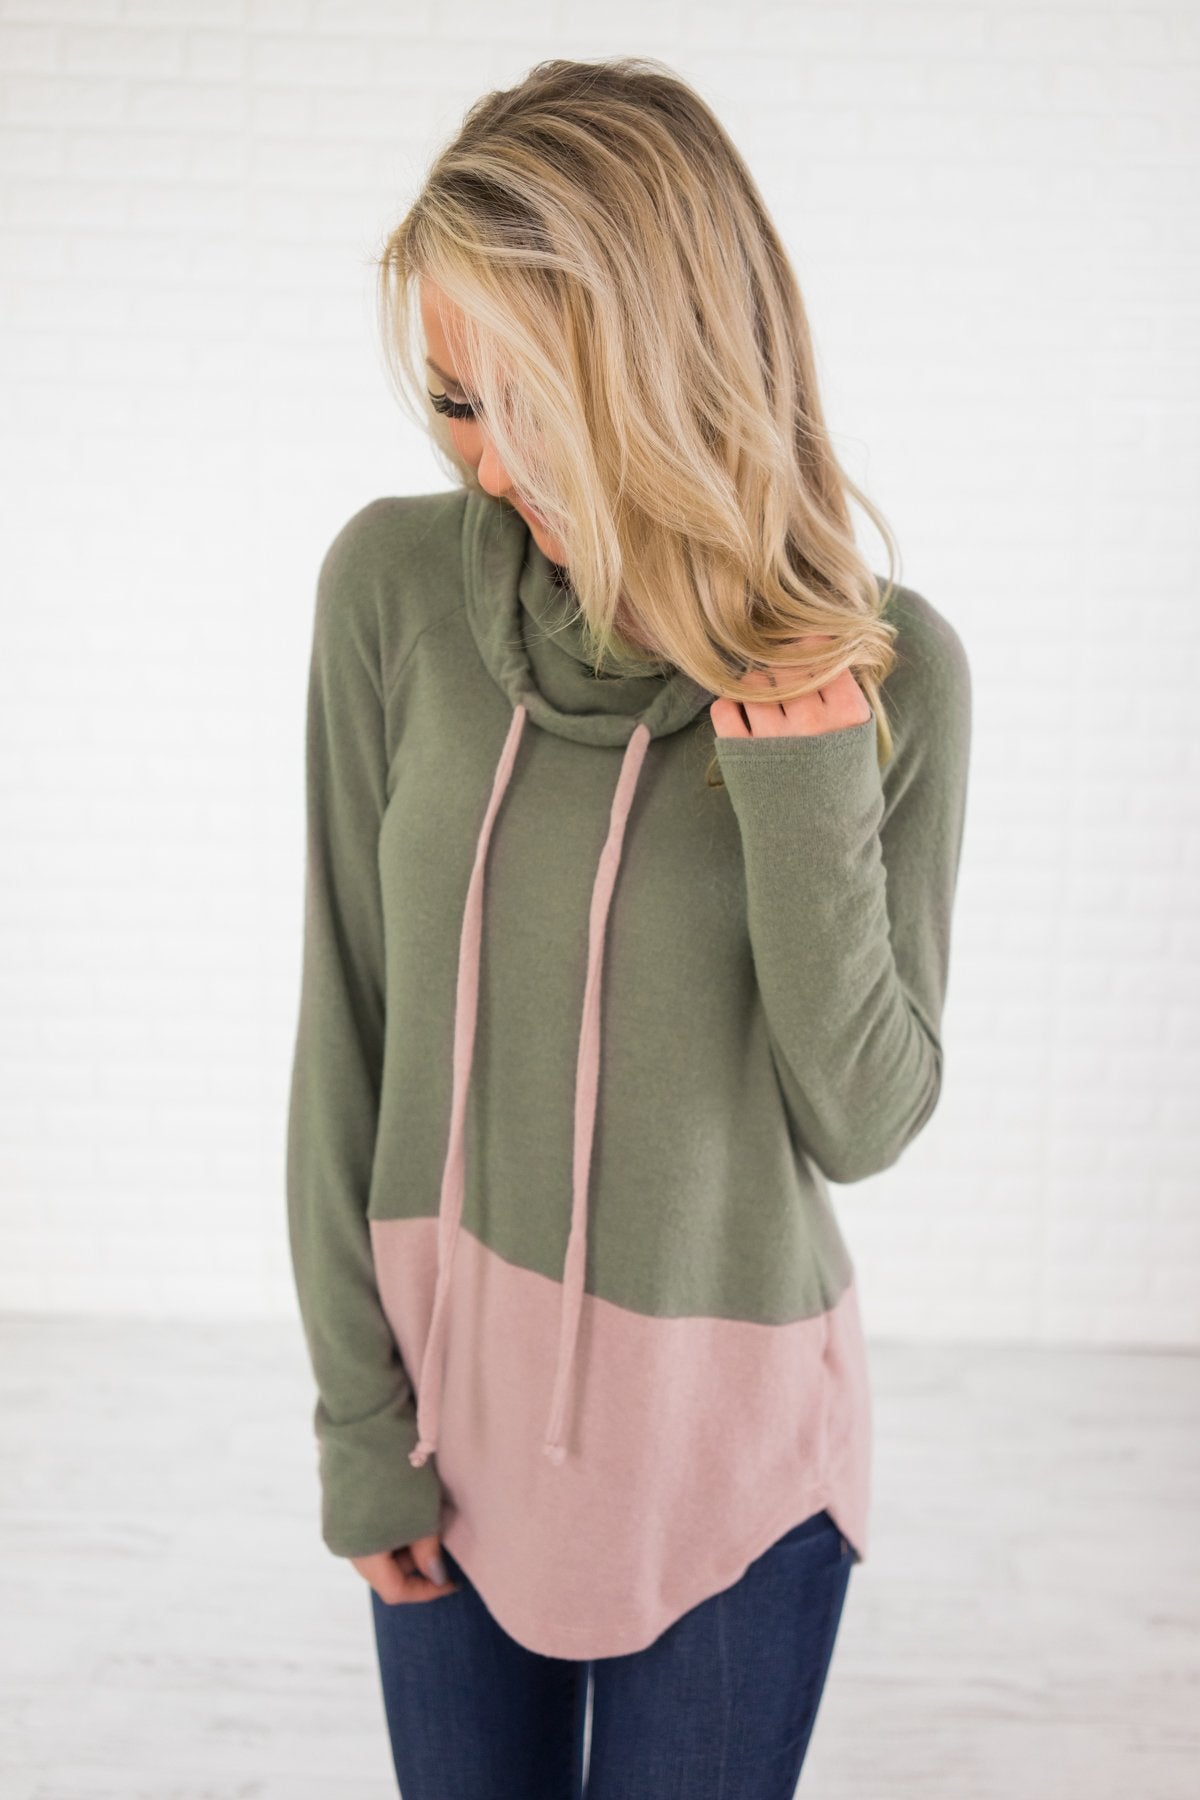 My Favorite Cowl Neck Top ~ Mossy Rose